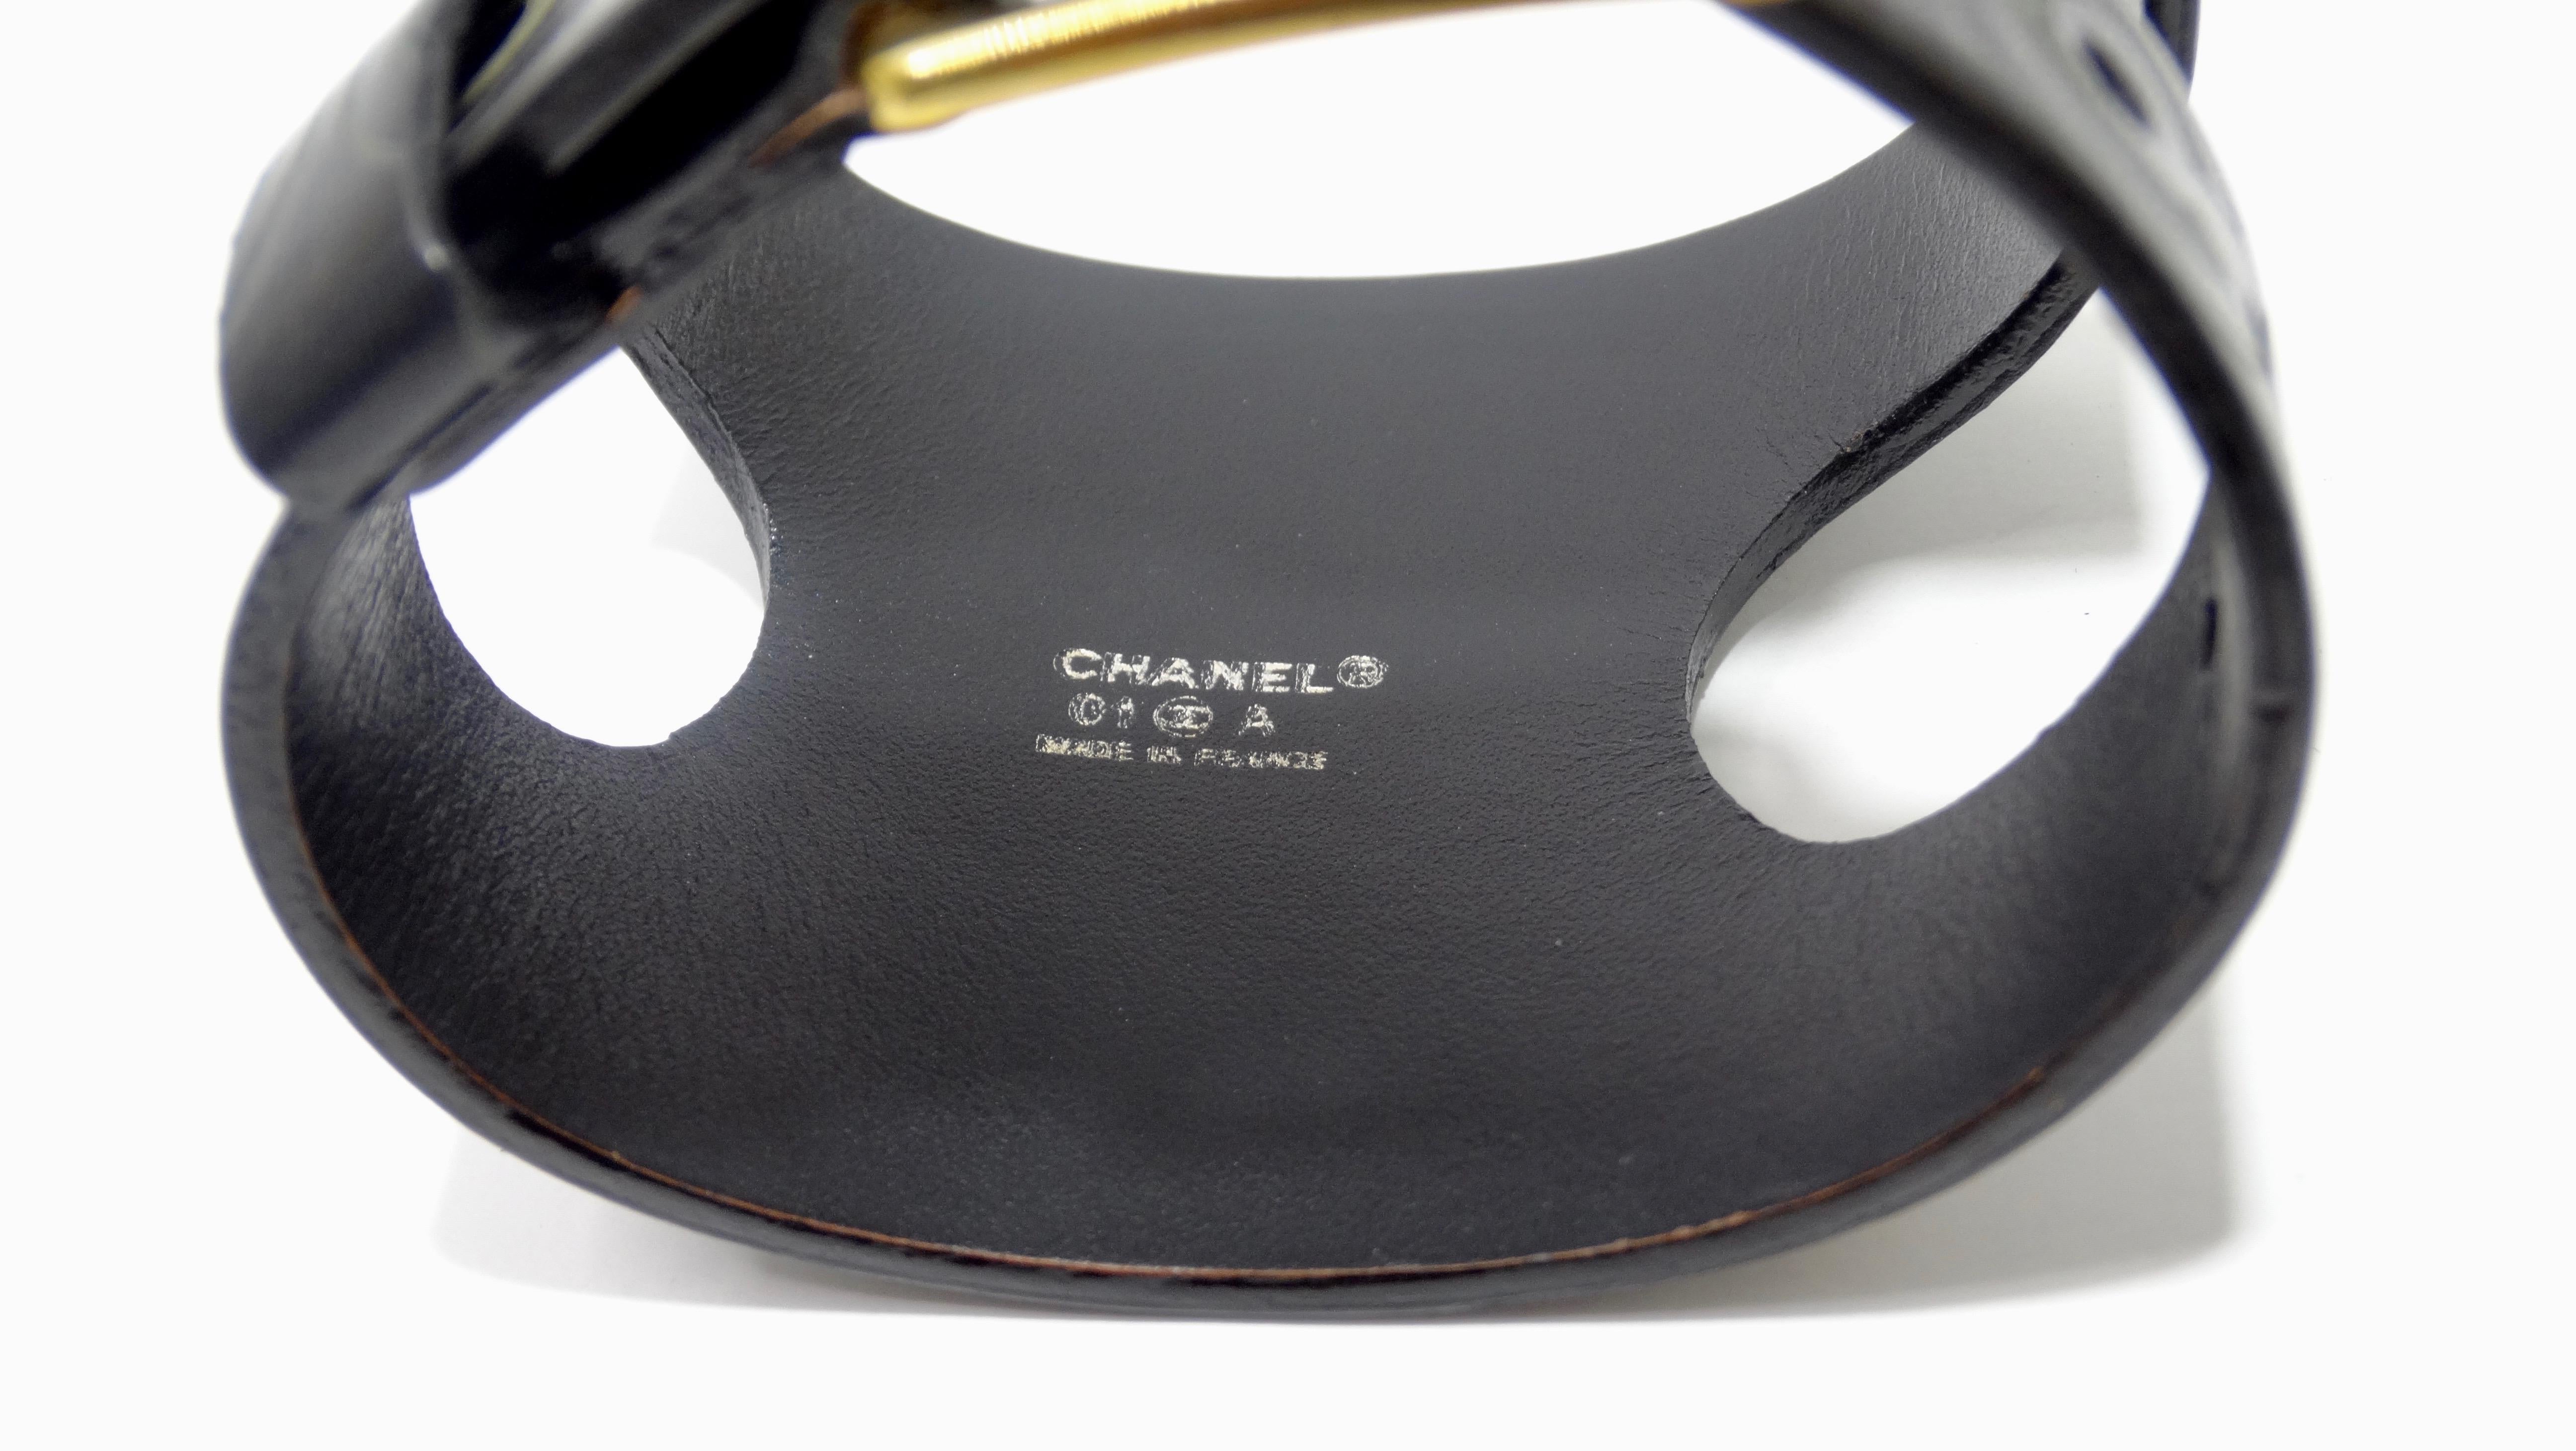 Chanel 2001 Leather 'Coco' Cuff In Good Condition For Sale In Scottsdale, AZ